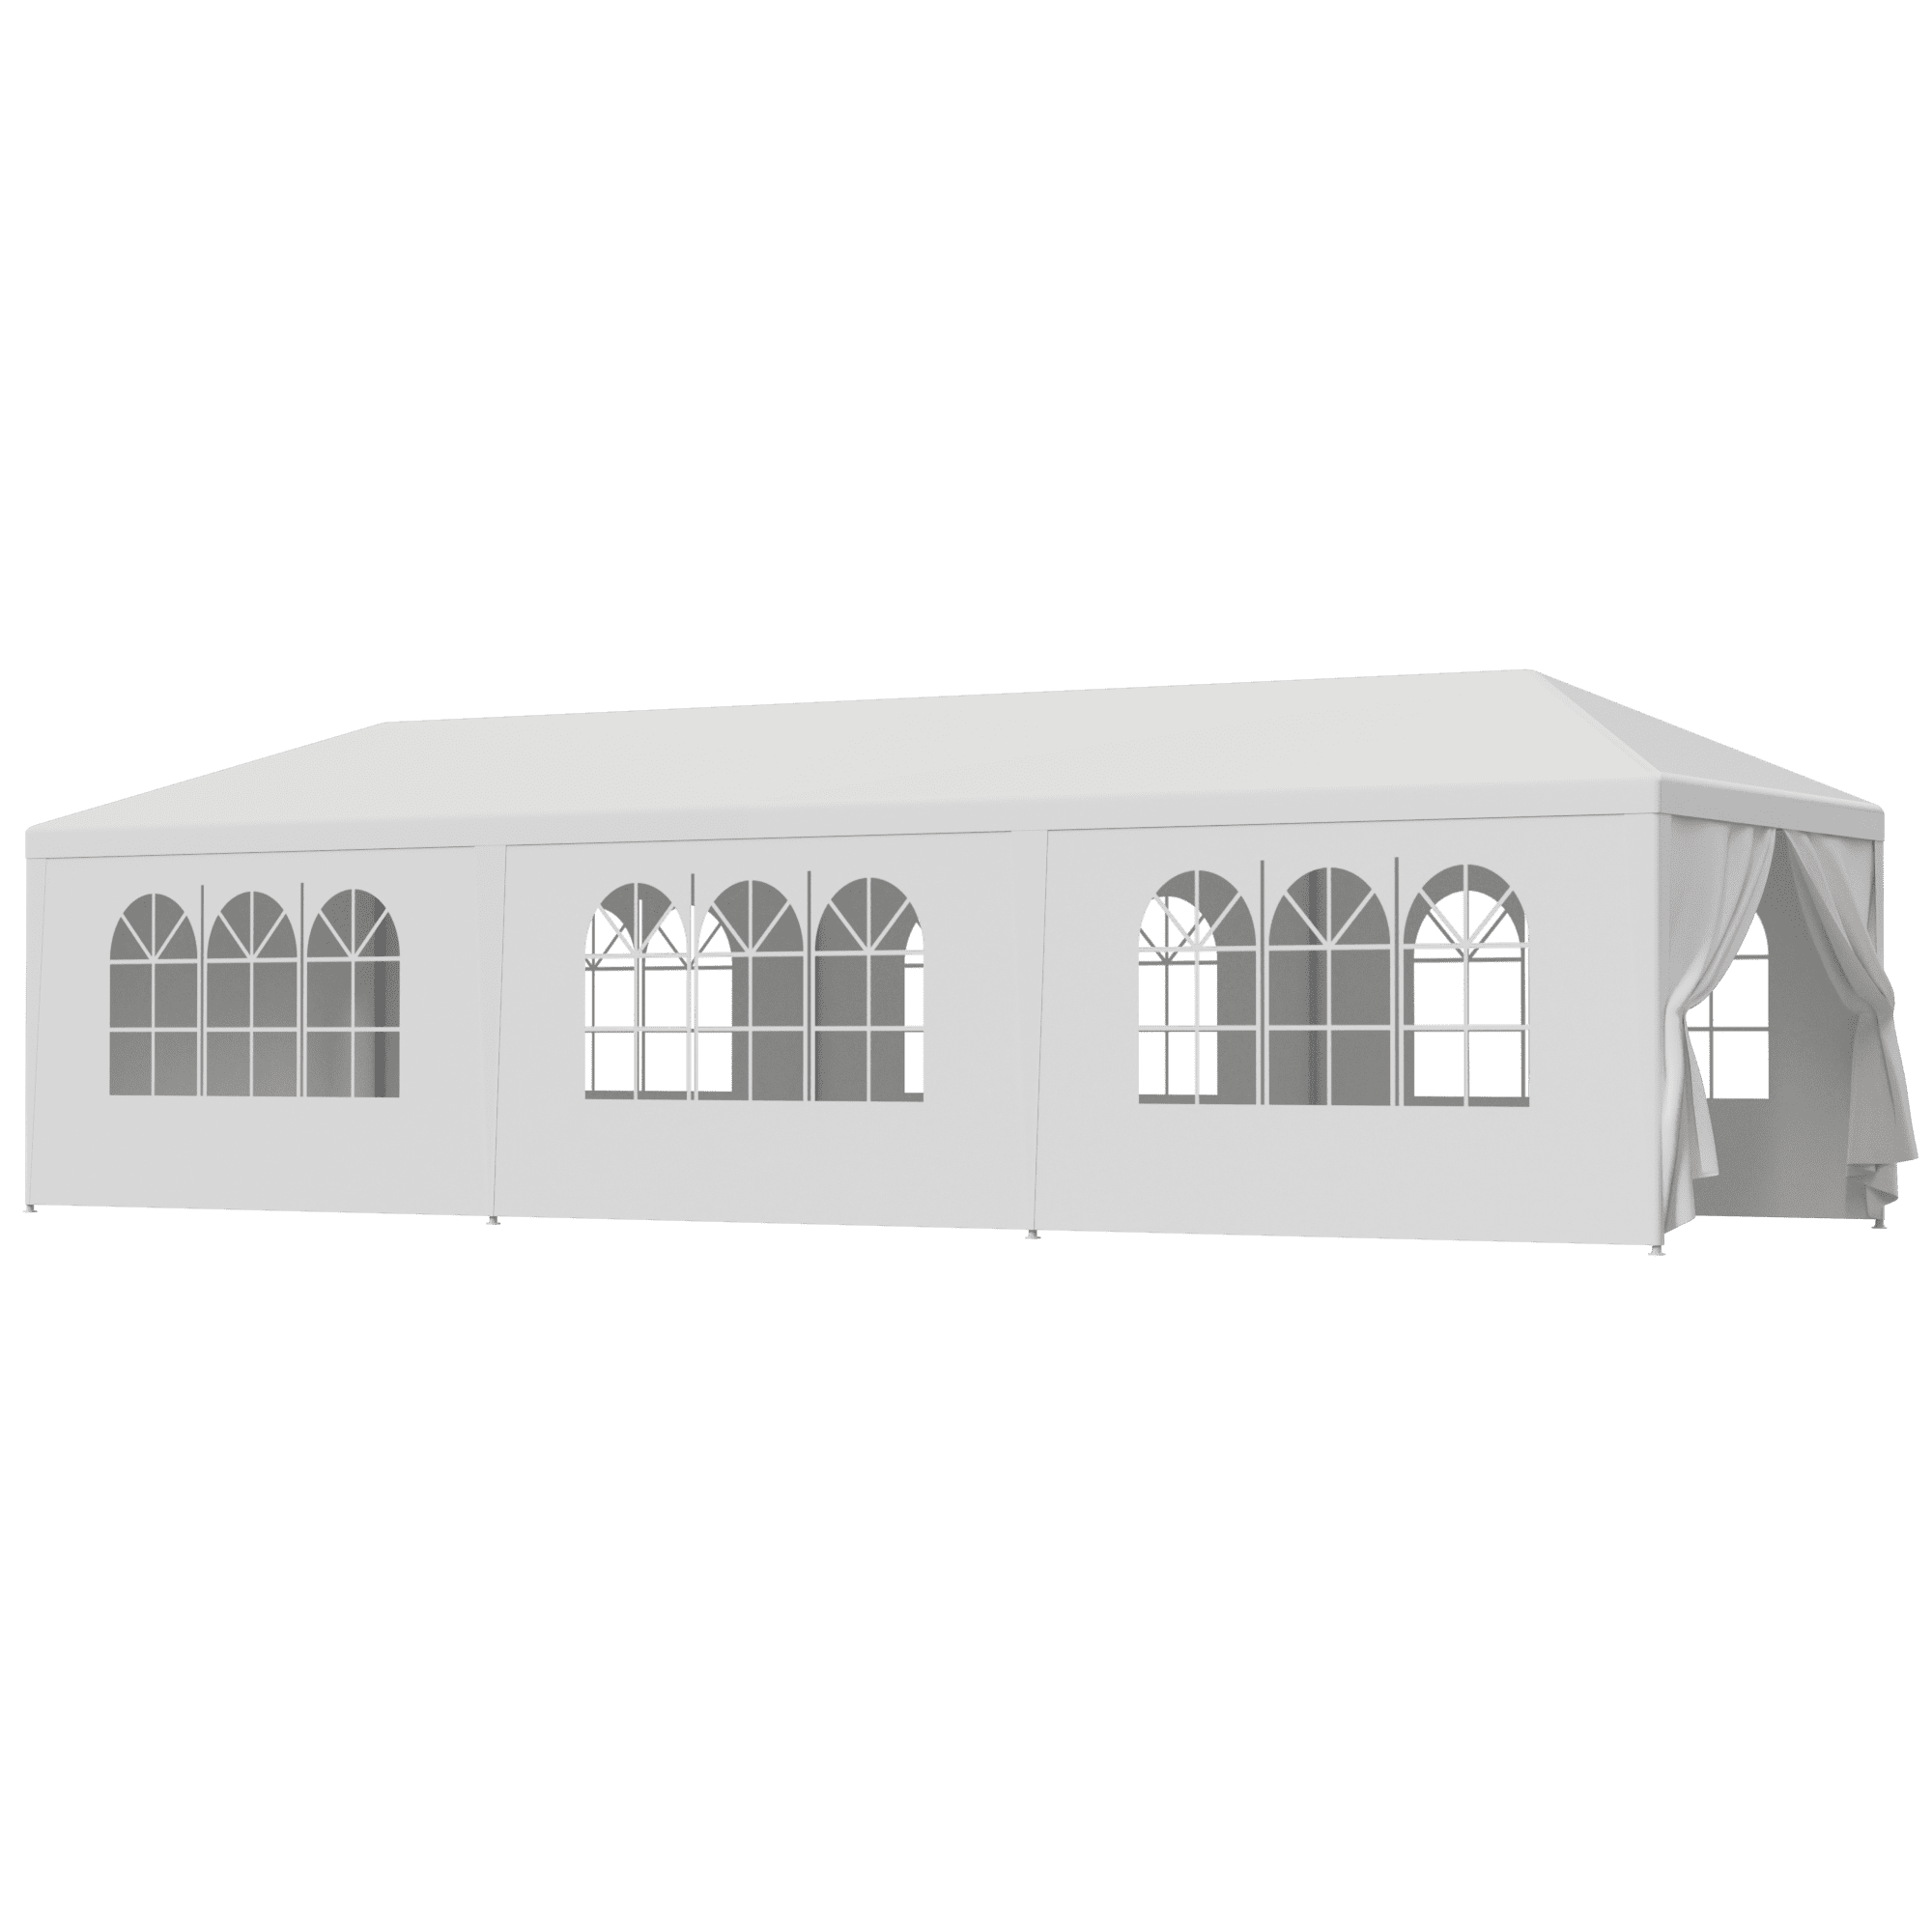 ZENSTYLE Patio Wedding Party Tent Set White Waterproof Canopy - 10 x 30' White